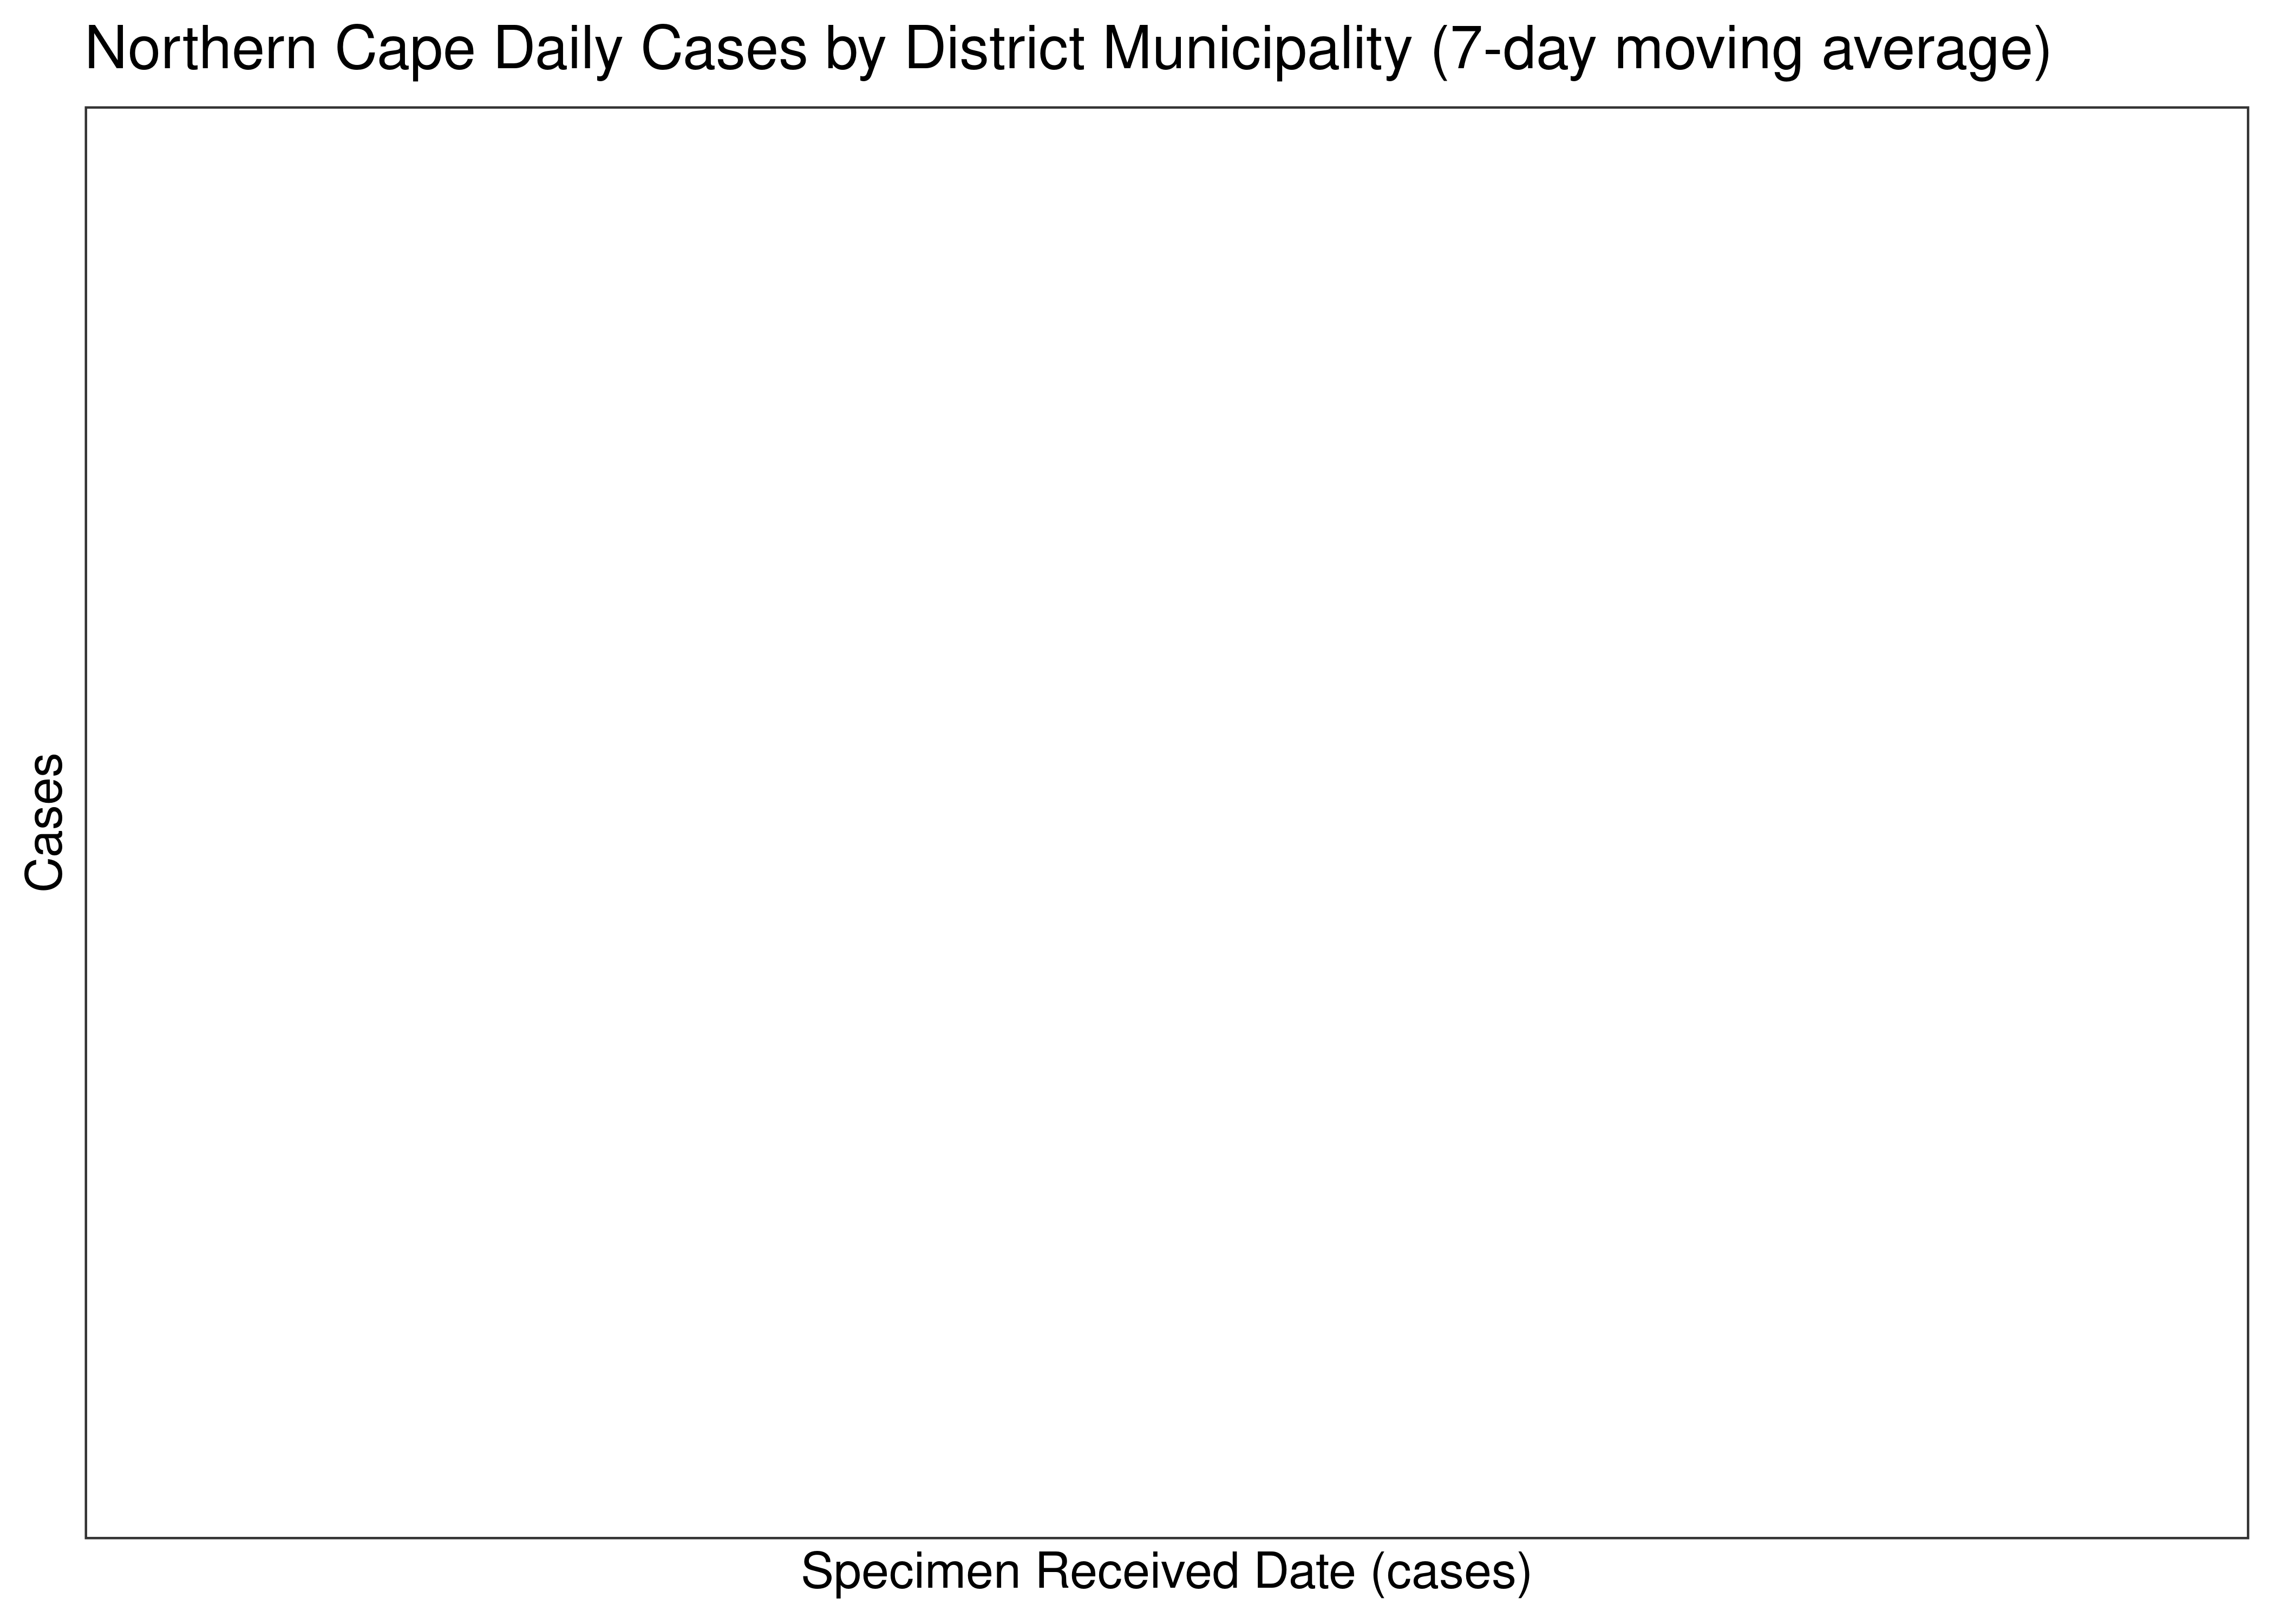 Northern Cape Daily Cases for Last 30-days by District Municipality (7-day moving average)